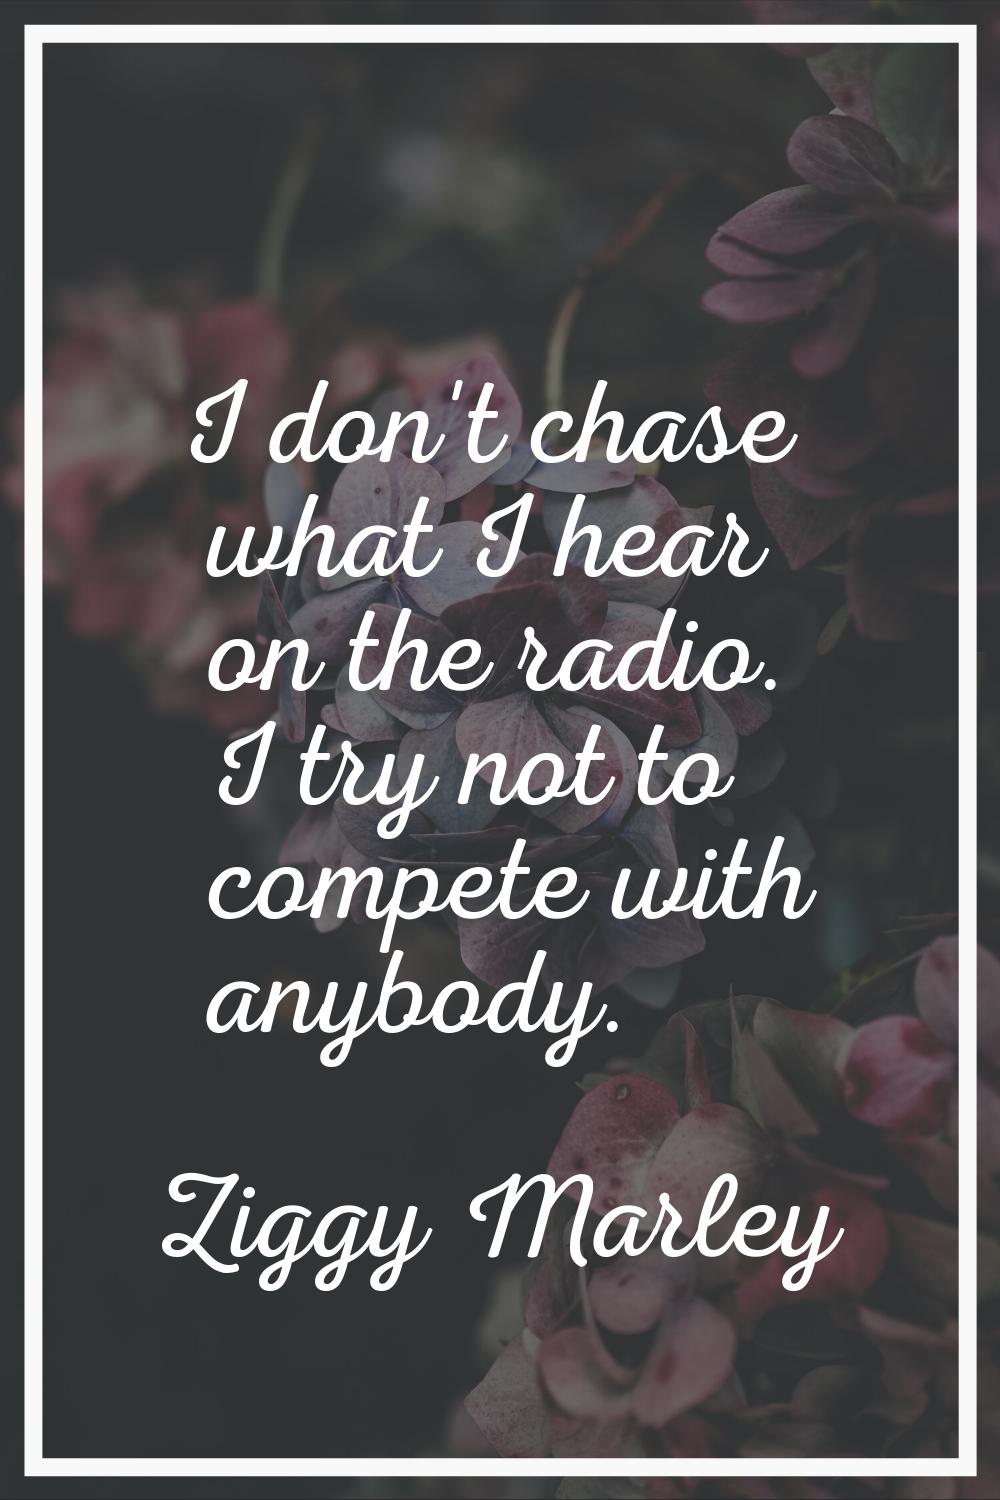 I don't chase what I hear on the radio. I try not to compete with anybody.